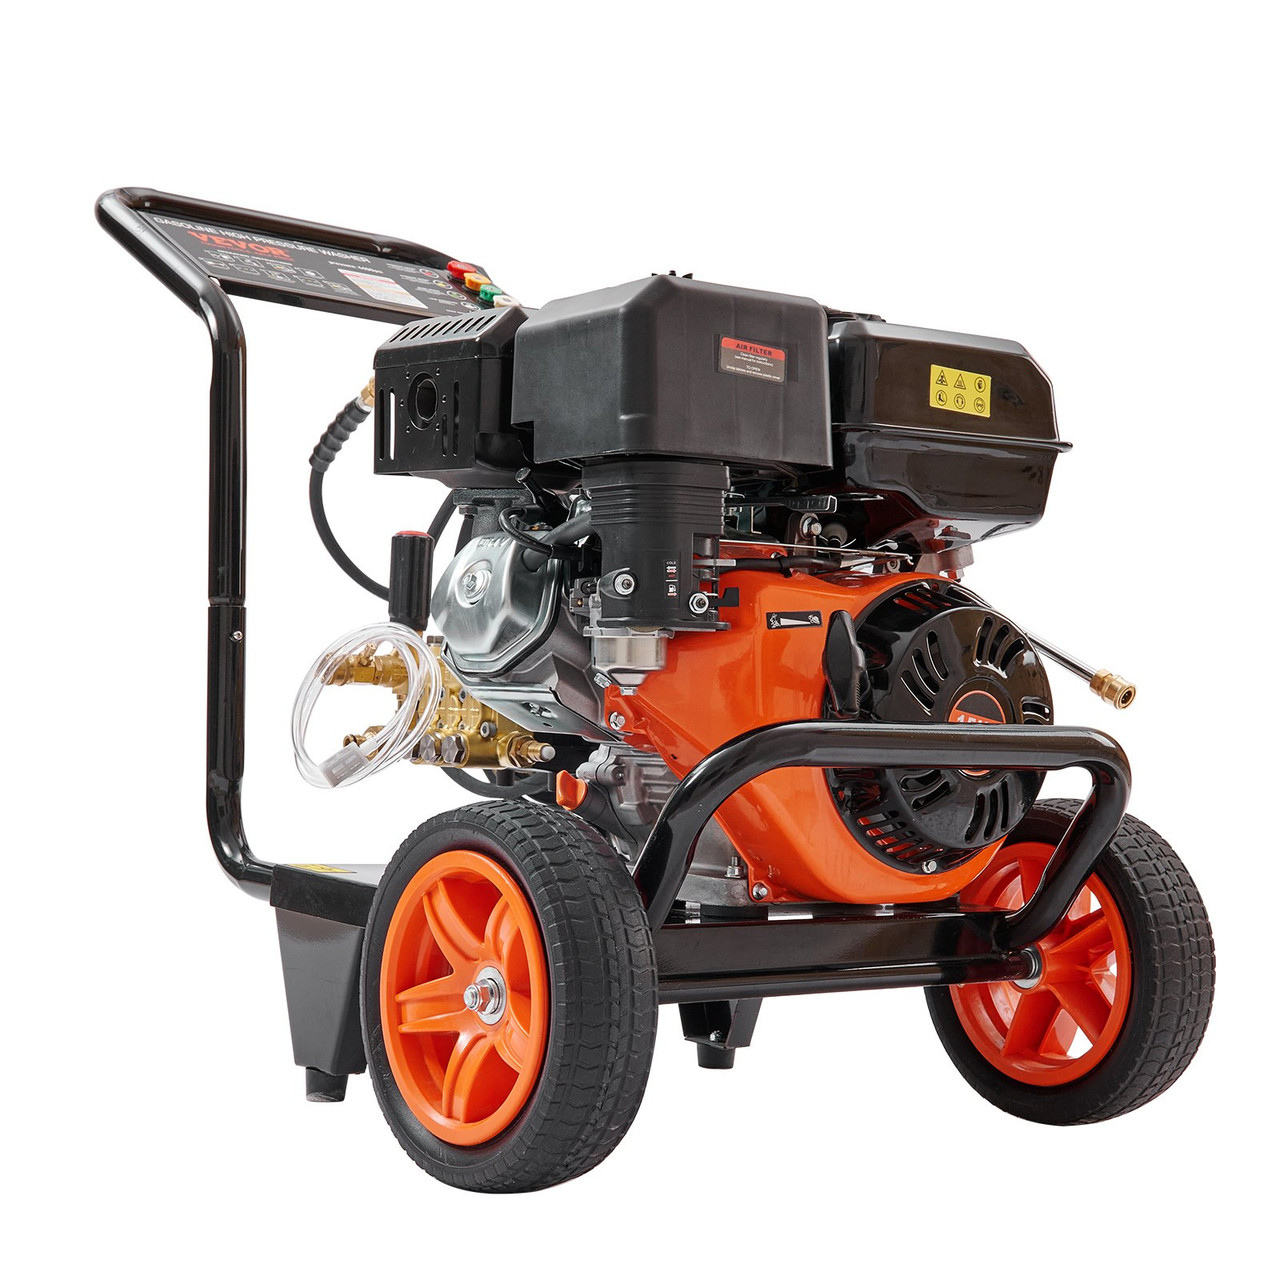 Gas Pressure Washer, 4400 PSI 4.0 GPM, Gas Powered Pressure Washer with Copper Pump, Spray Gun and Extension Wand, 5 Quick Connect Nozzles, for Cleaning Cars, Homes, Driveways, Patios